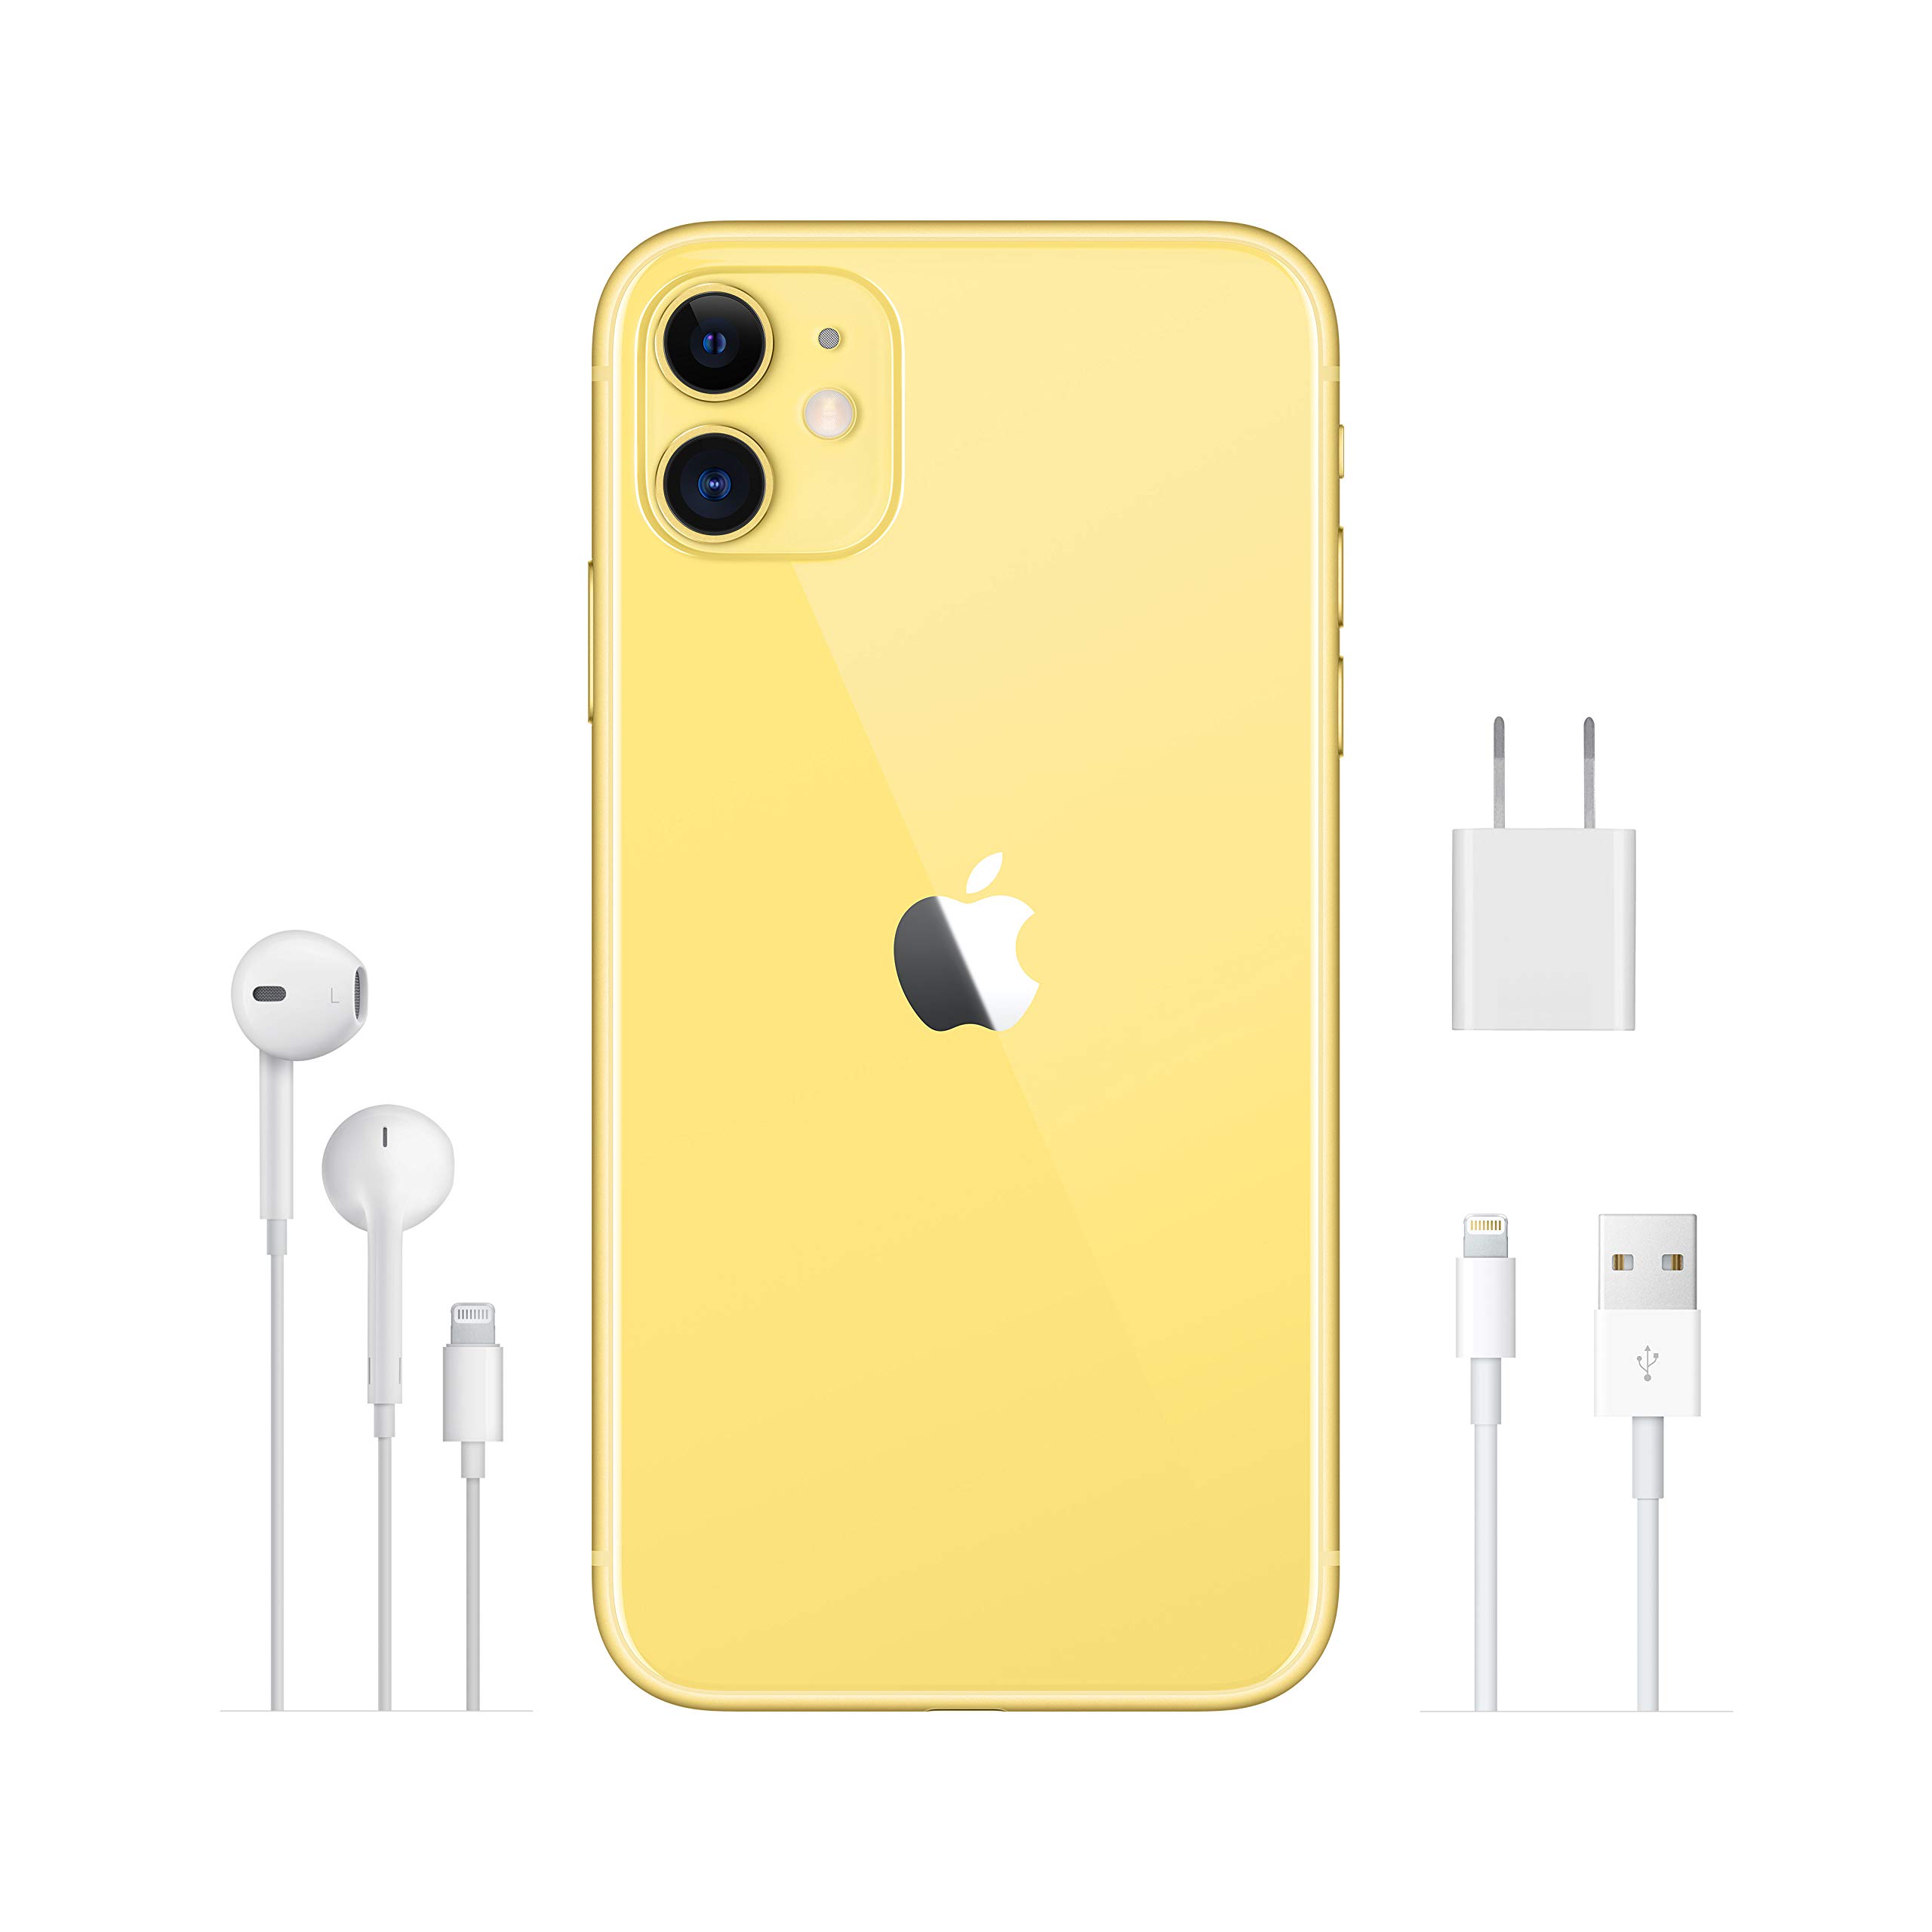 Apple iPhone 11 [64GB, Yellow] + Carrier Subscription [Cricket Wireless]